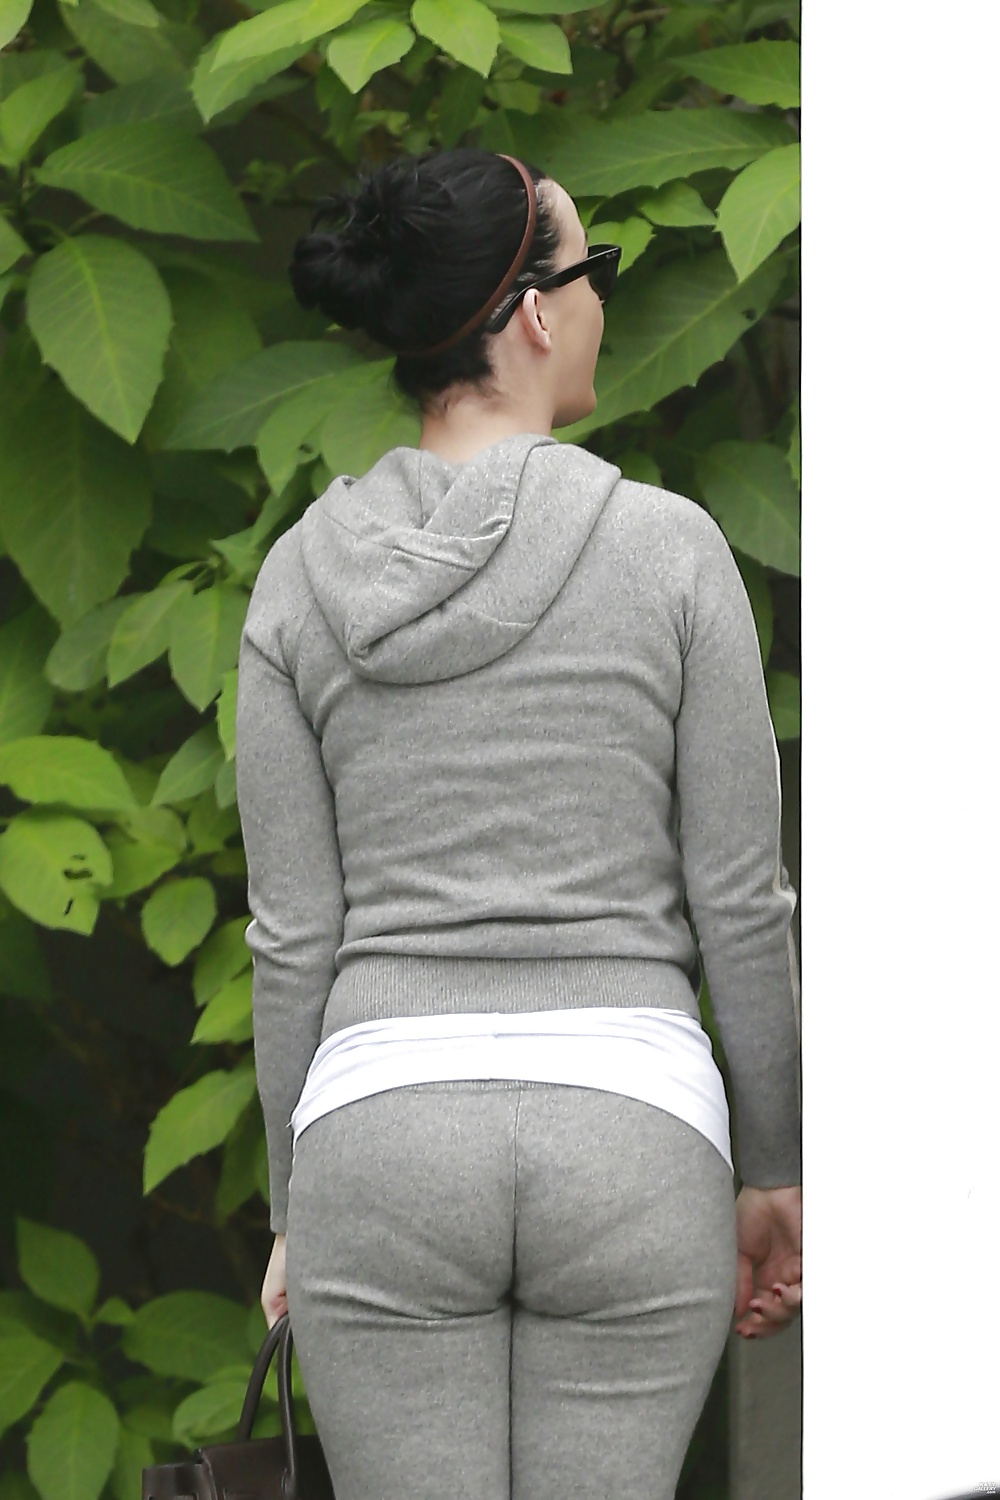 Katy Perry's Ass #3246356